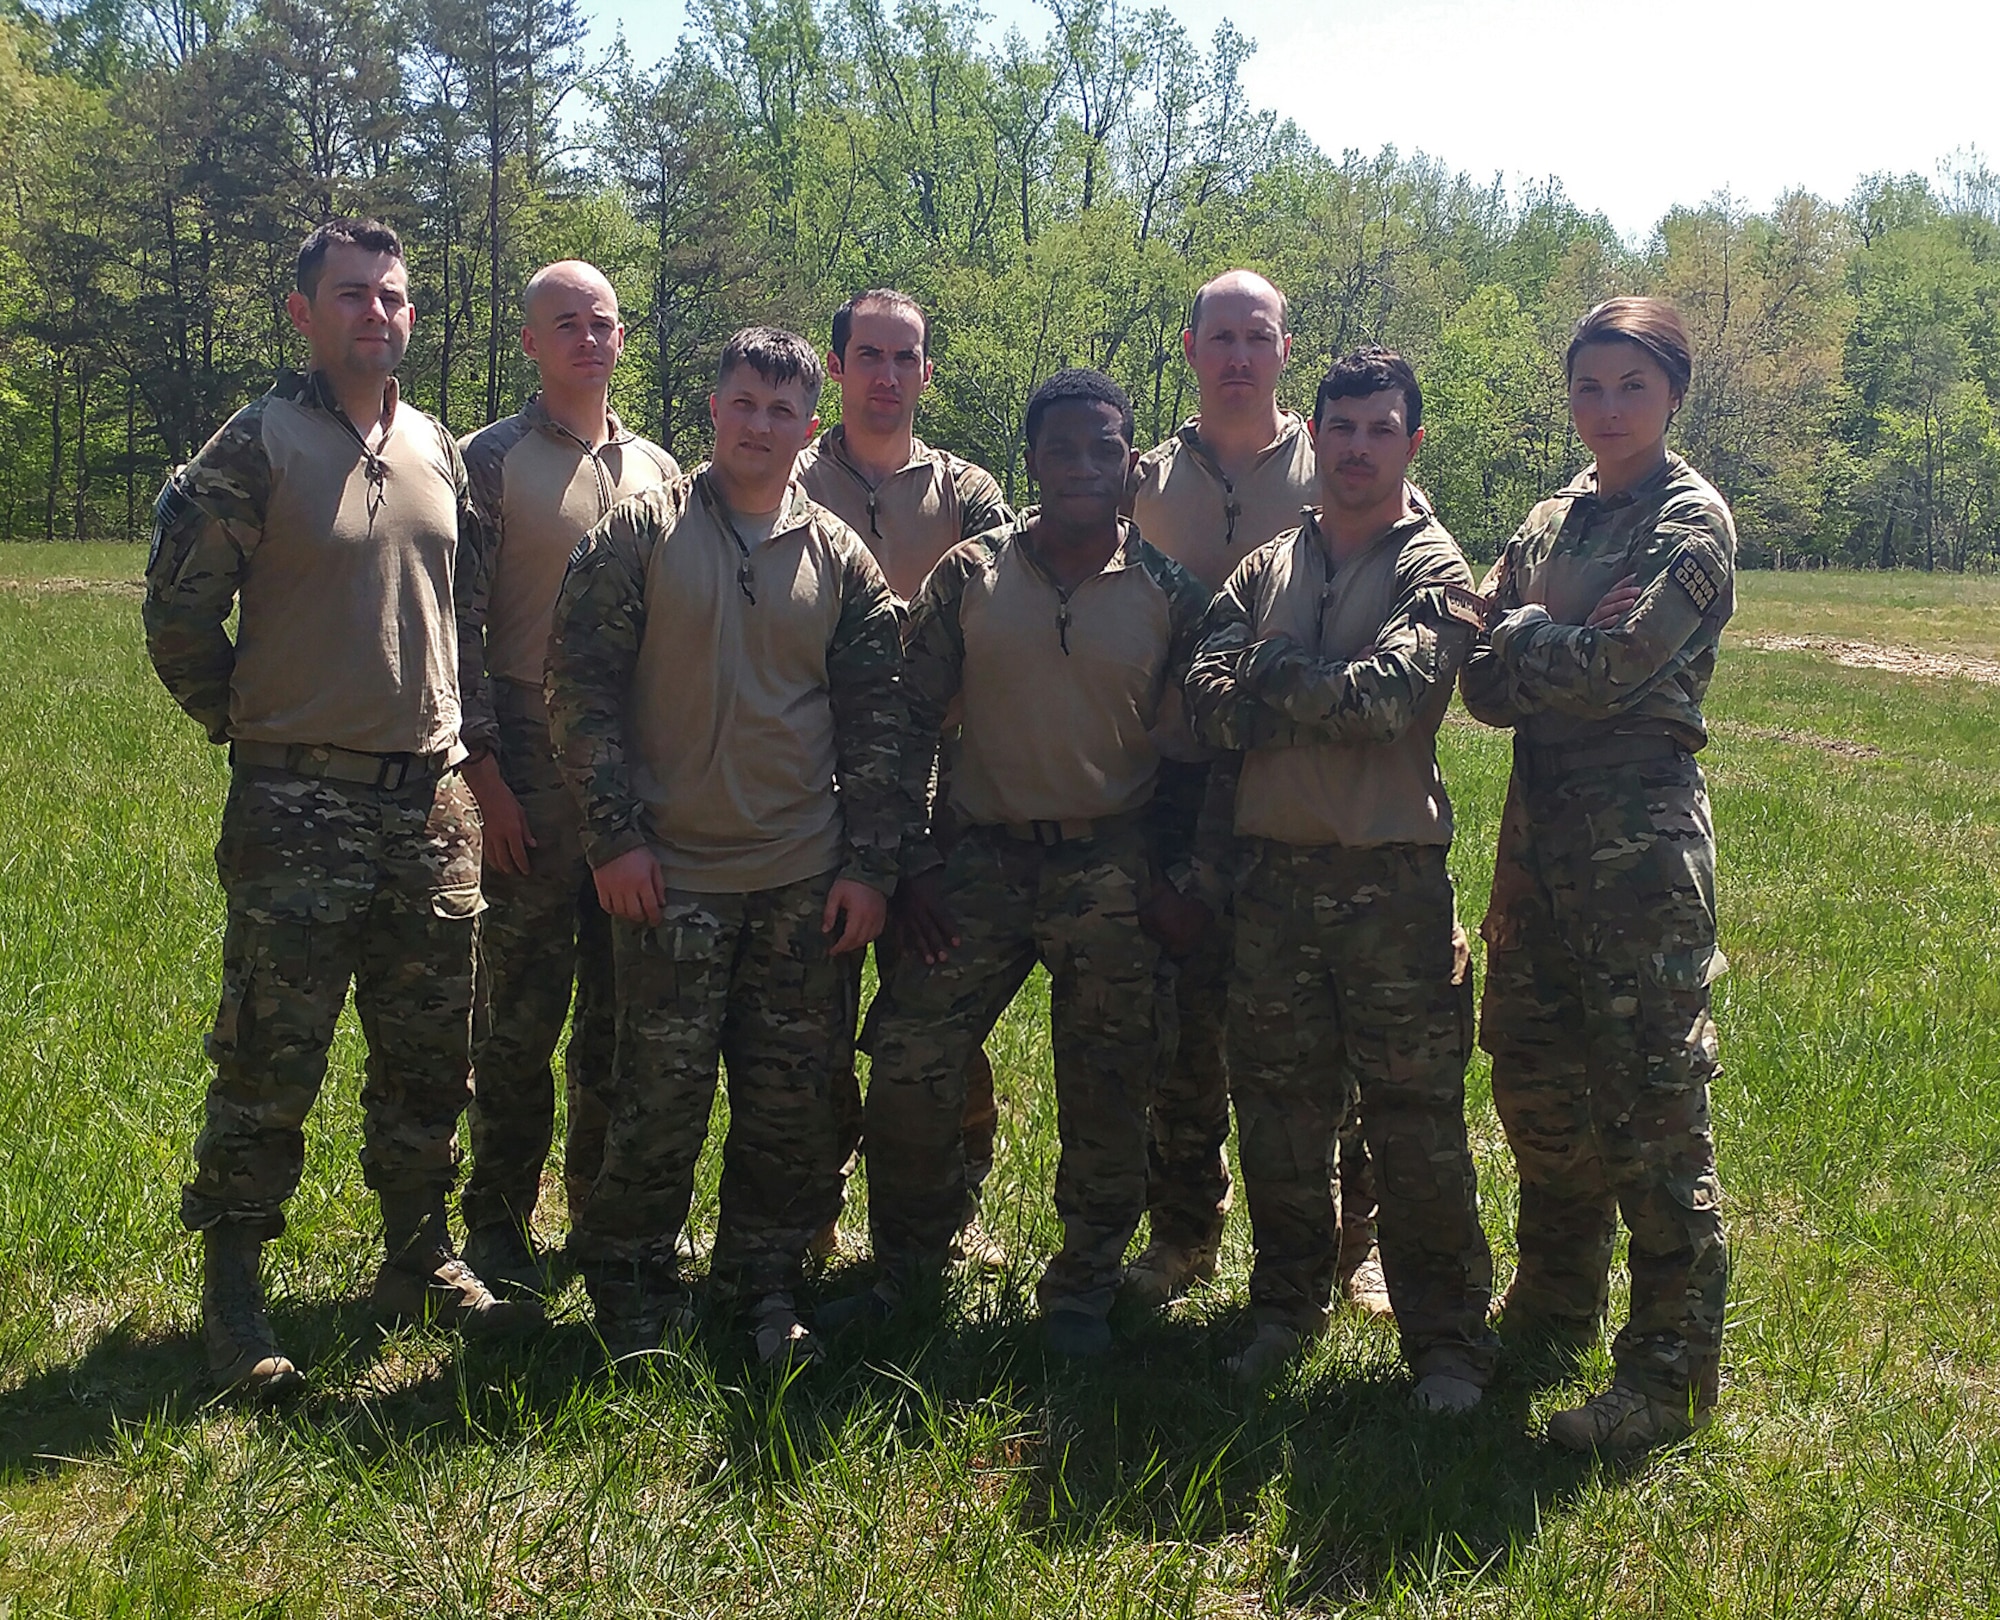 Airmen from the 1st Combat Camera Squadron and 4th Combat Camera Squadron, pose for a photo following the completion of a 10-mile road march at the 2018 SPC Hilda I. Clayton Best Combat Camera Competition at Marine Corps Base Quantico, Va., May 3, 2018. The competition is an annual event open to all branches of the military, it's hosted by the 55th Signal Company (Combat Camera) in order to test the technical and tactical proficiencies of Defense Department combat photographers. (U.S. Air Force photo by Maj. Zach Anderson)